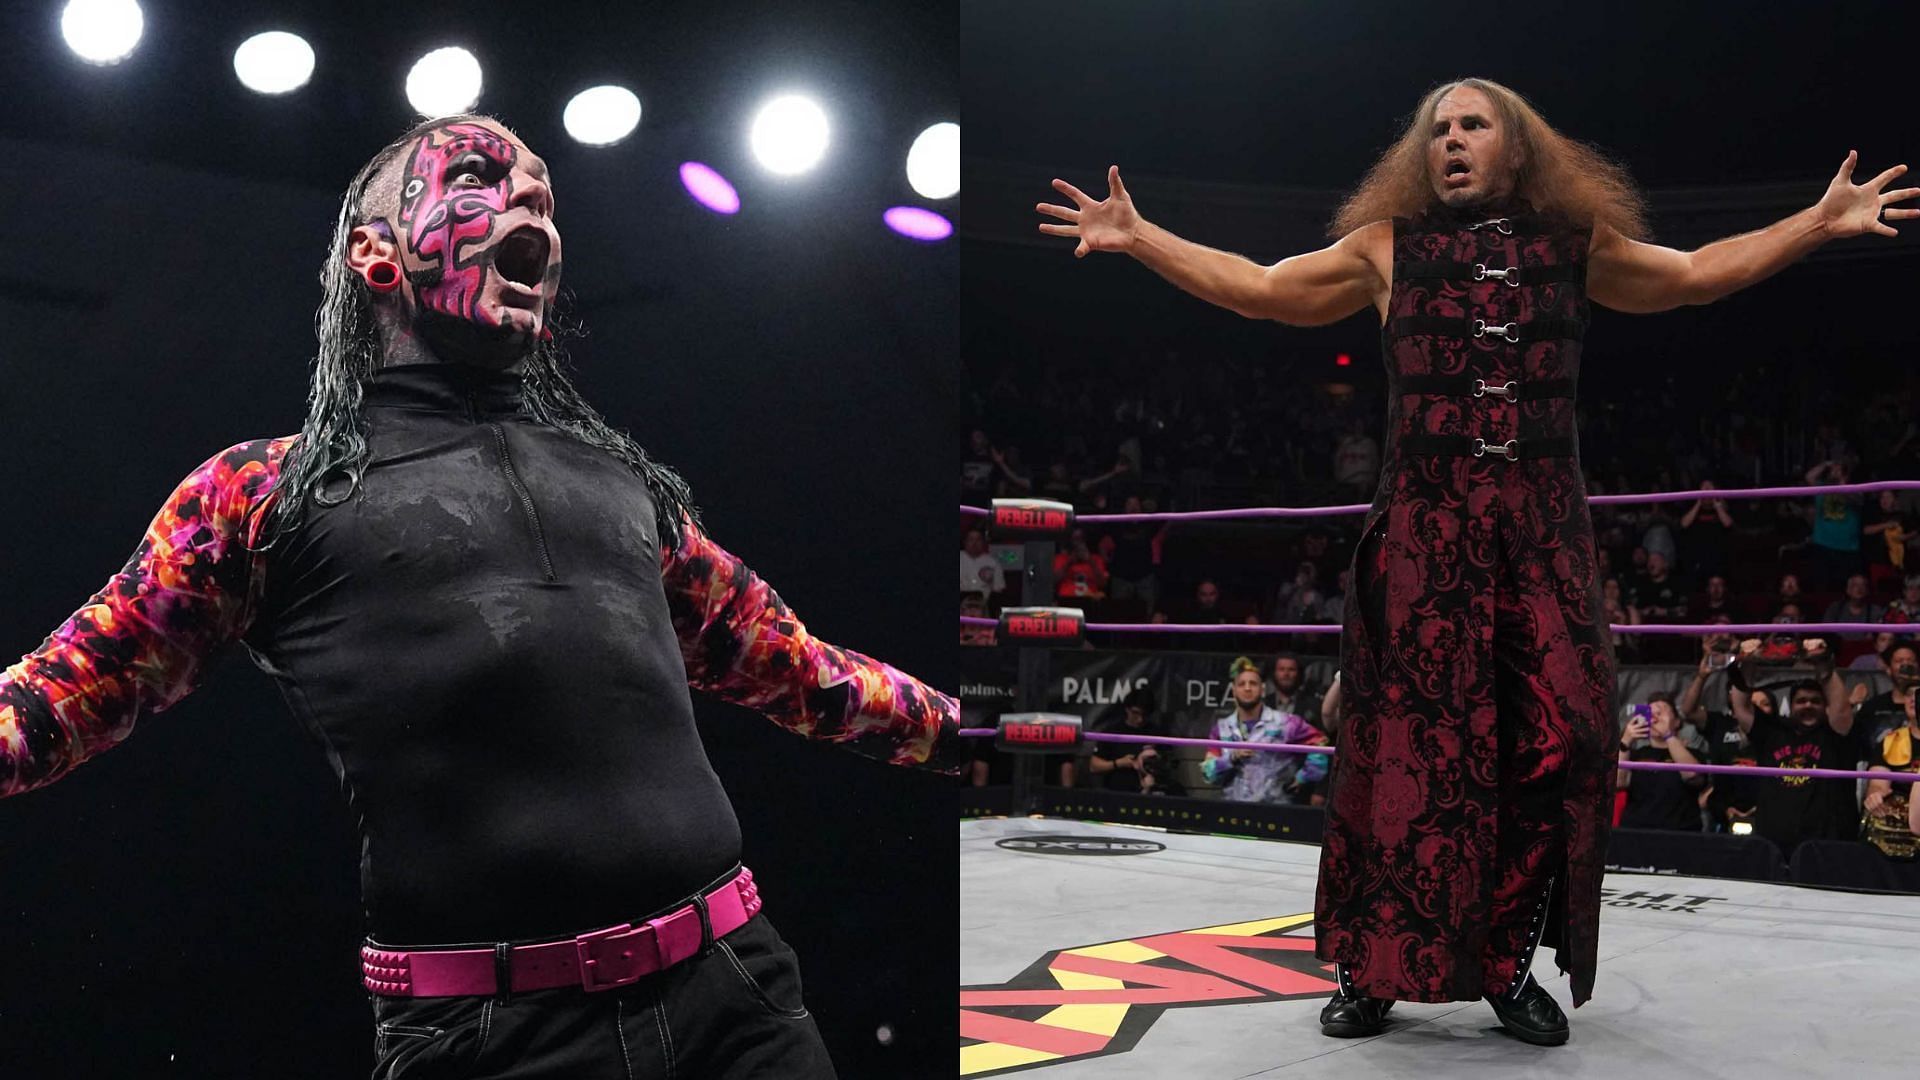 The Hardy Boyz are one of the most iconic tag teams in the industry [Photos courtesy of AEW and TNA